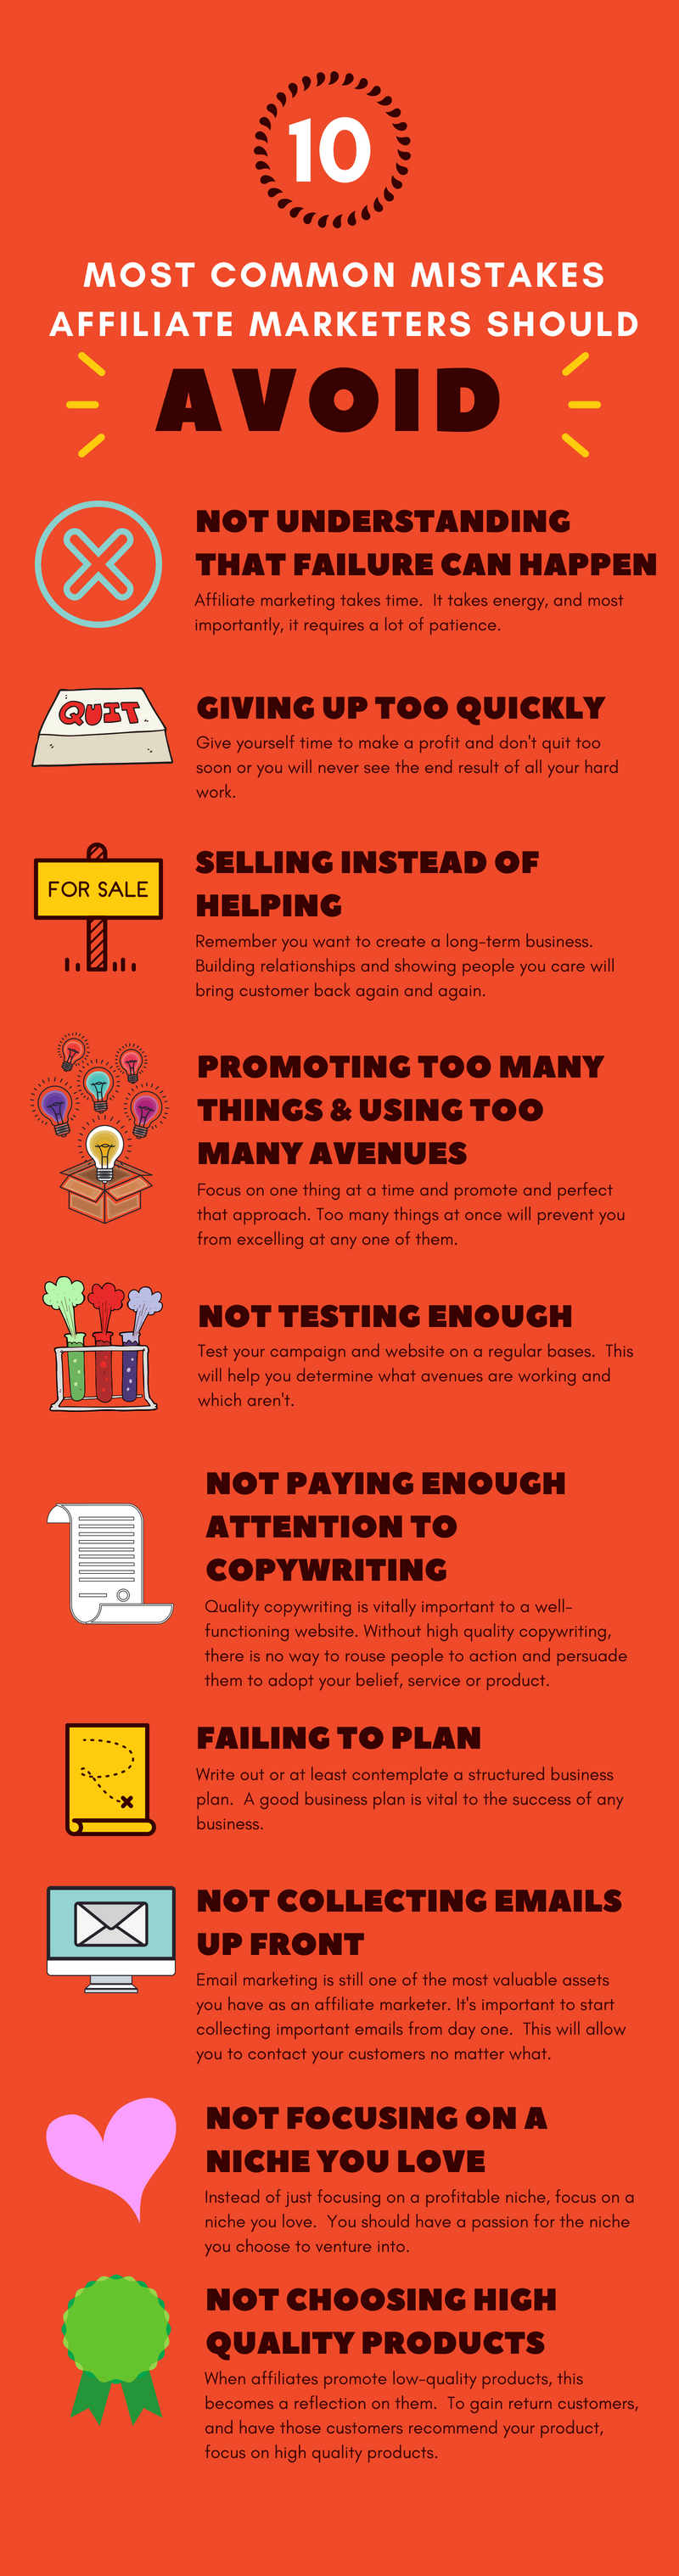 10 mistakes to avoid as an affiliate marketer infographic.